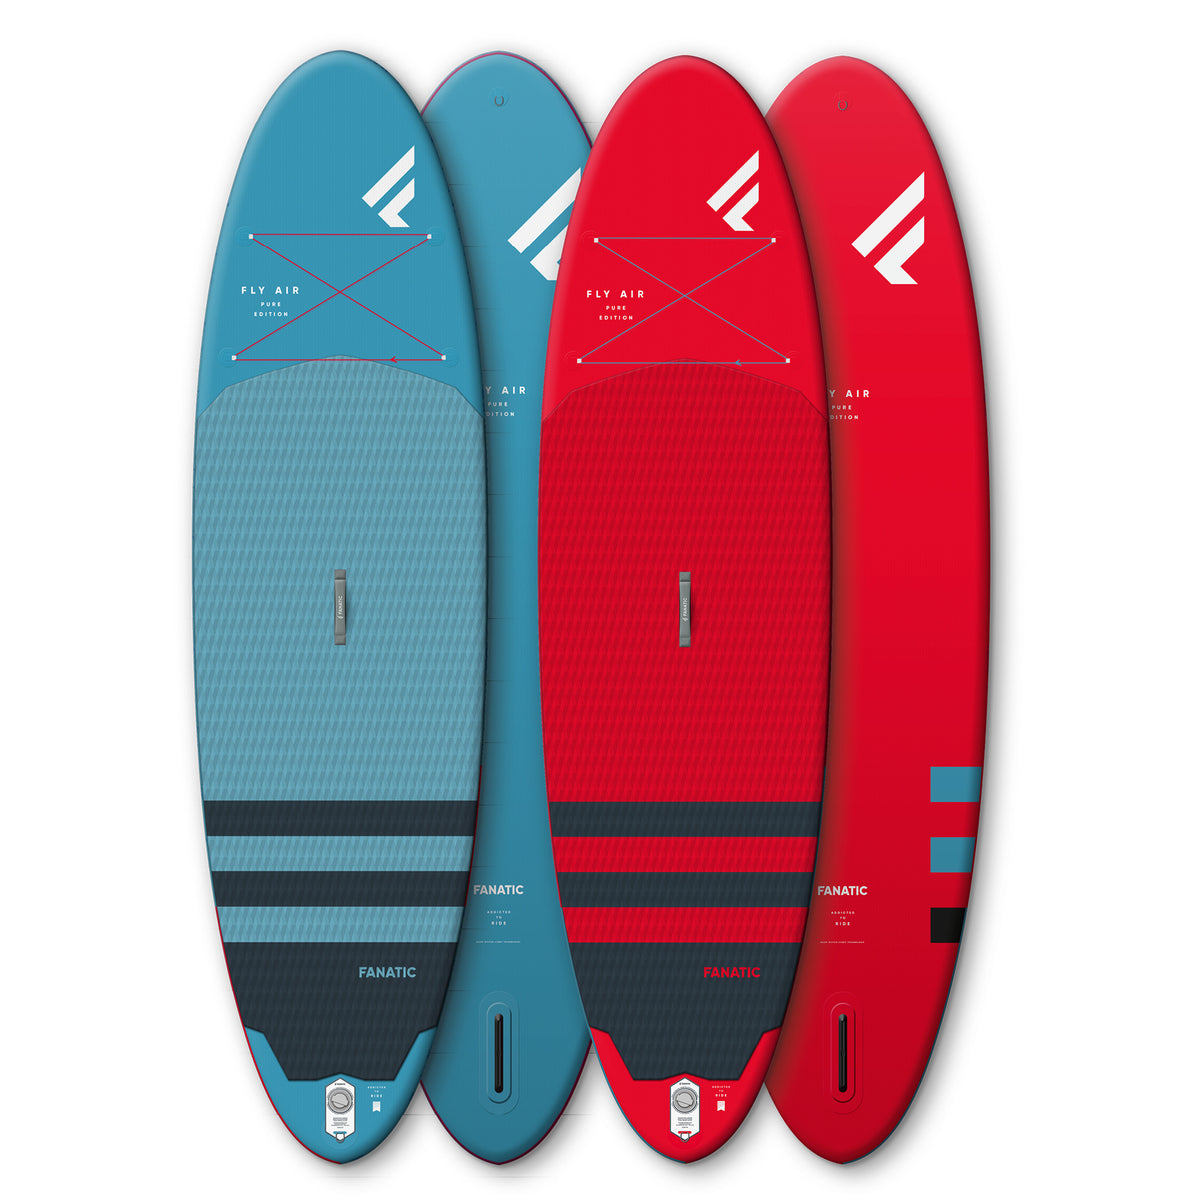 FANATIC FLY AIR 10'8" BLUE inflatable sup board